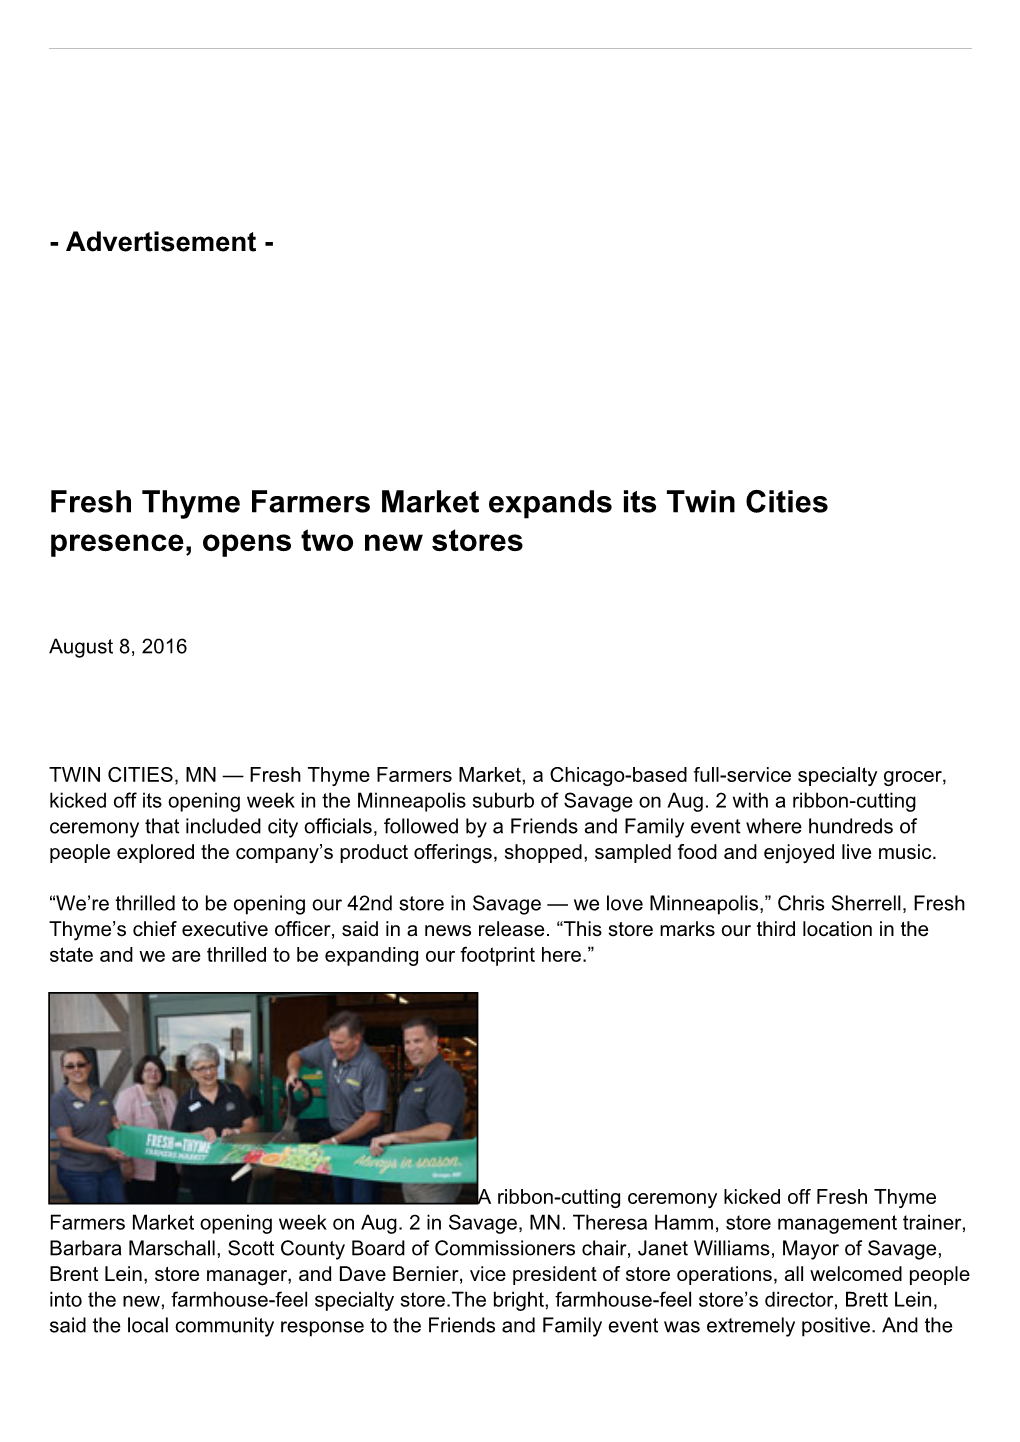 Fresh Thyme Farmers Market Expands Its Twin Cities Presence, Opens Two New Stores